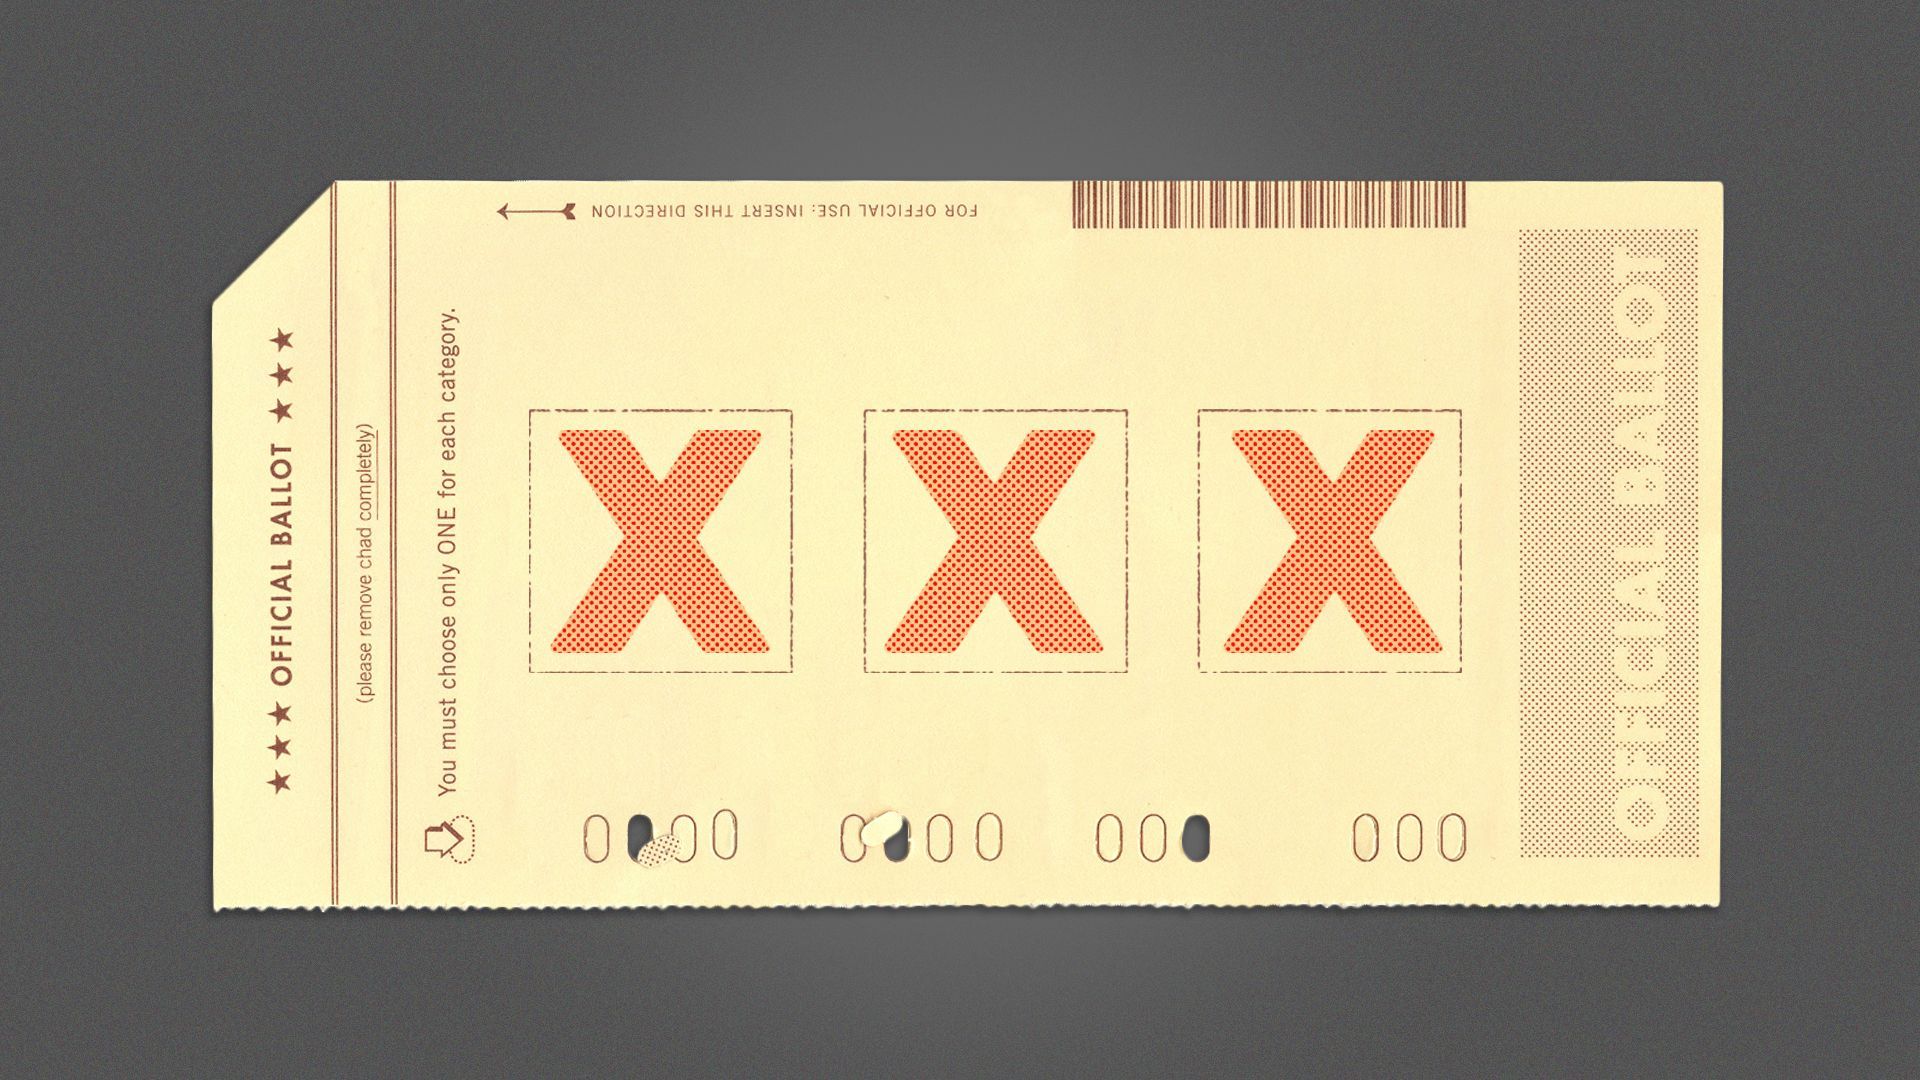 Illustration of a ballot with "XXX" on it.